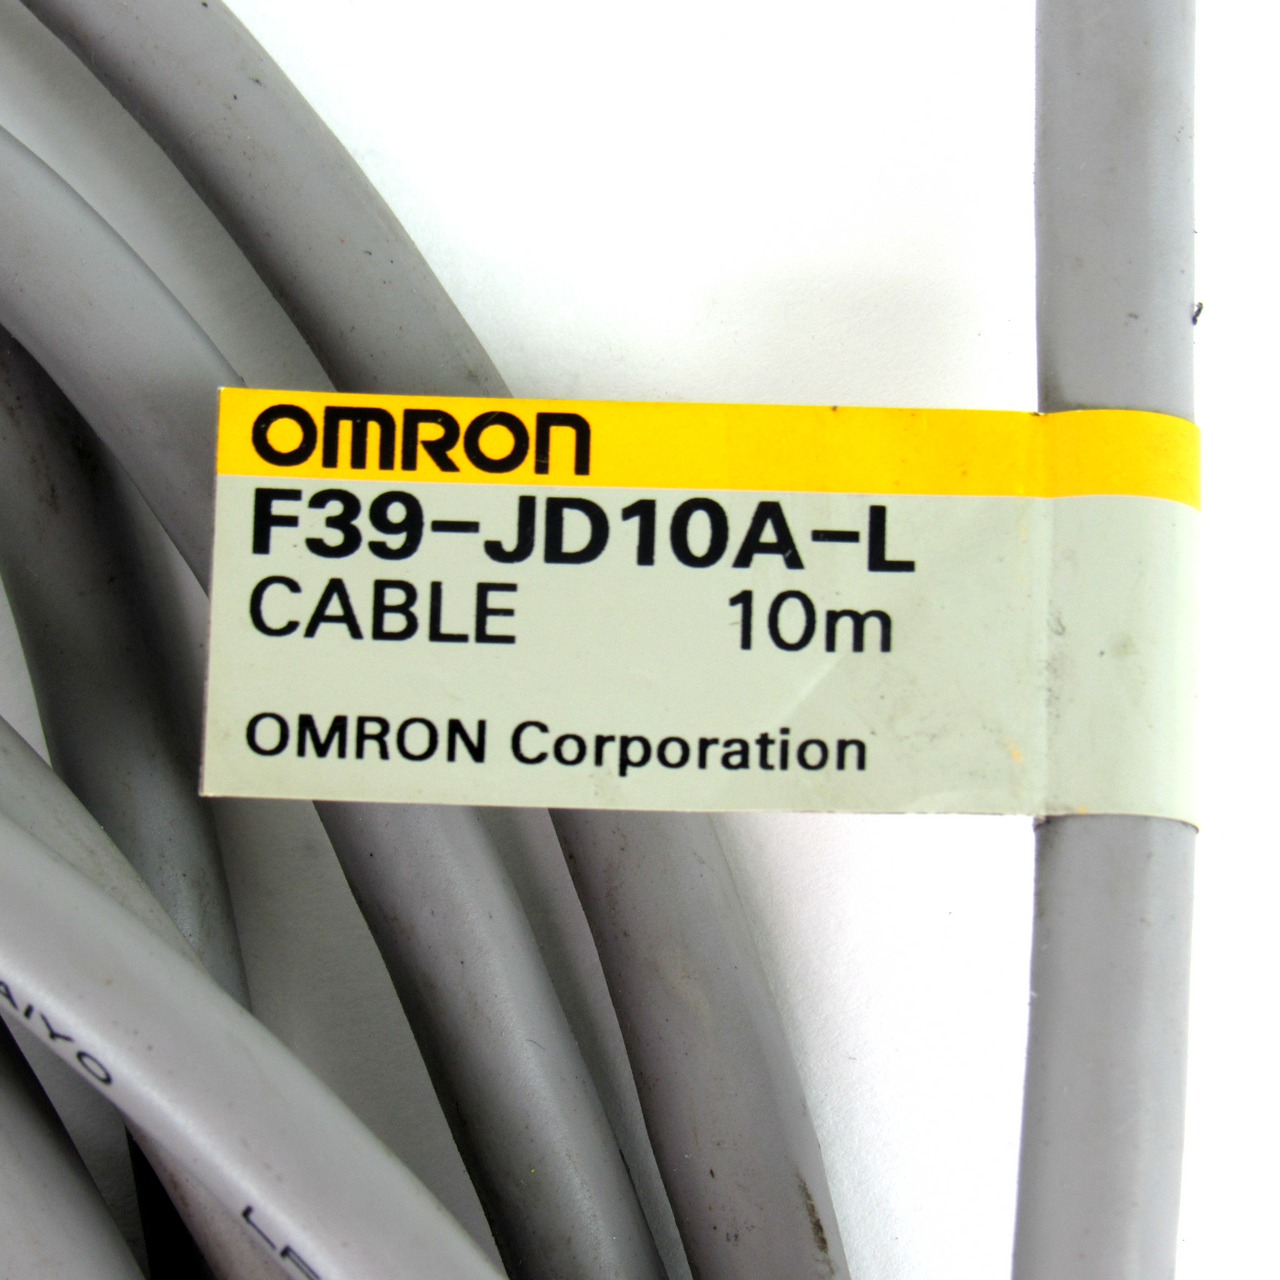 Omron F39-JD10A-L Sensor Cable, Single Ended, 10m, Used